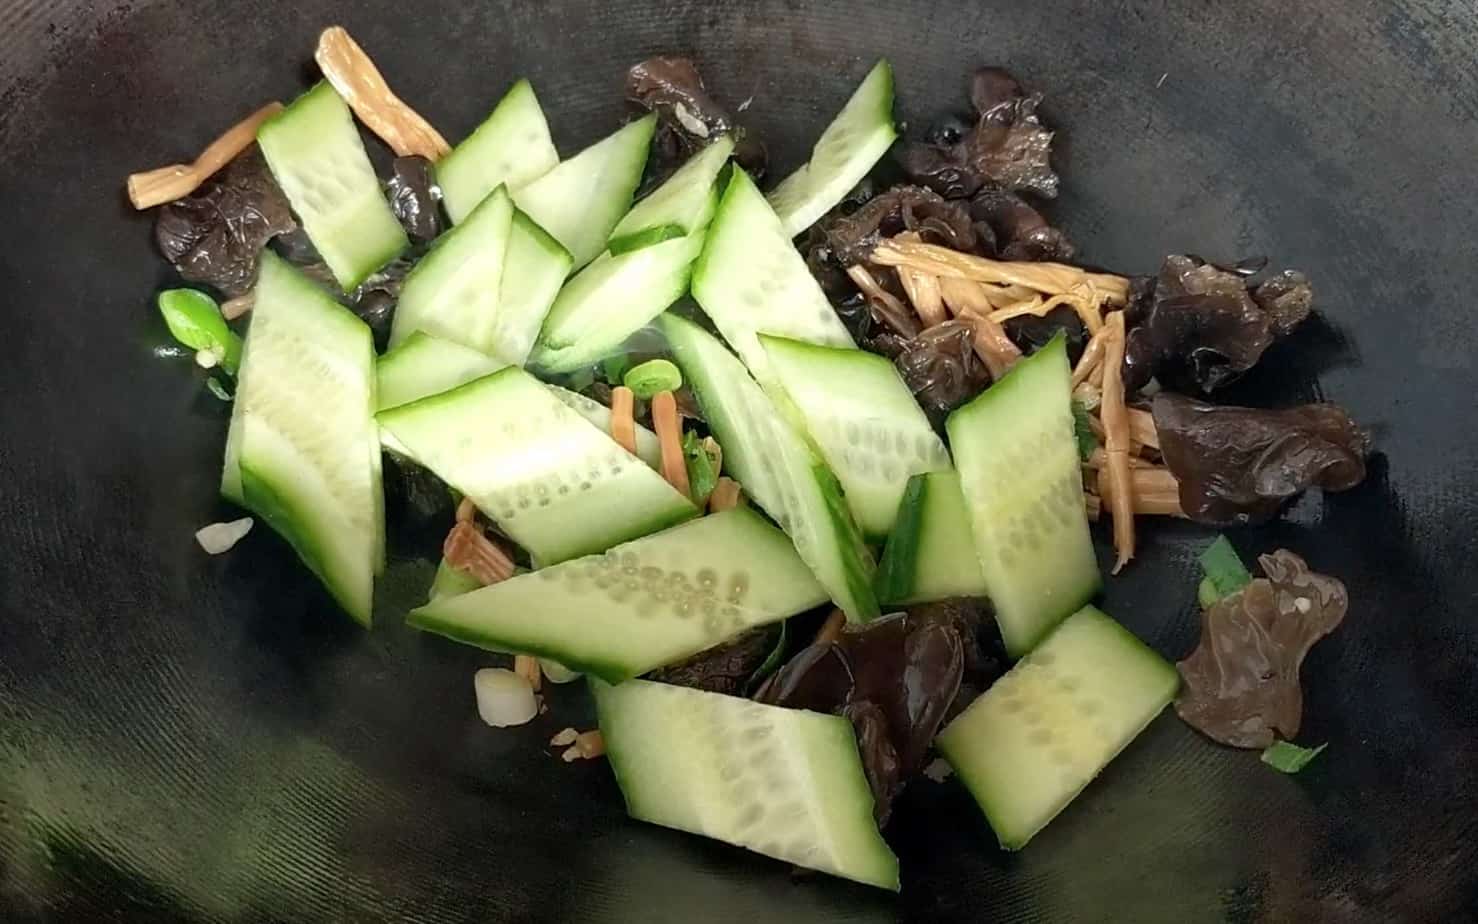 frying cucumber, wood ear mushroom and lily buds